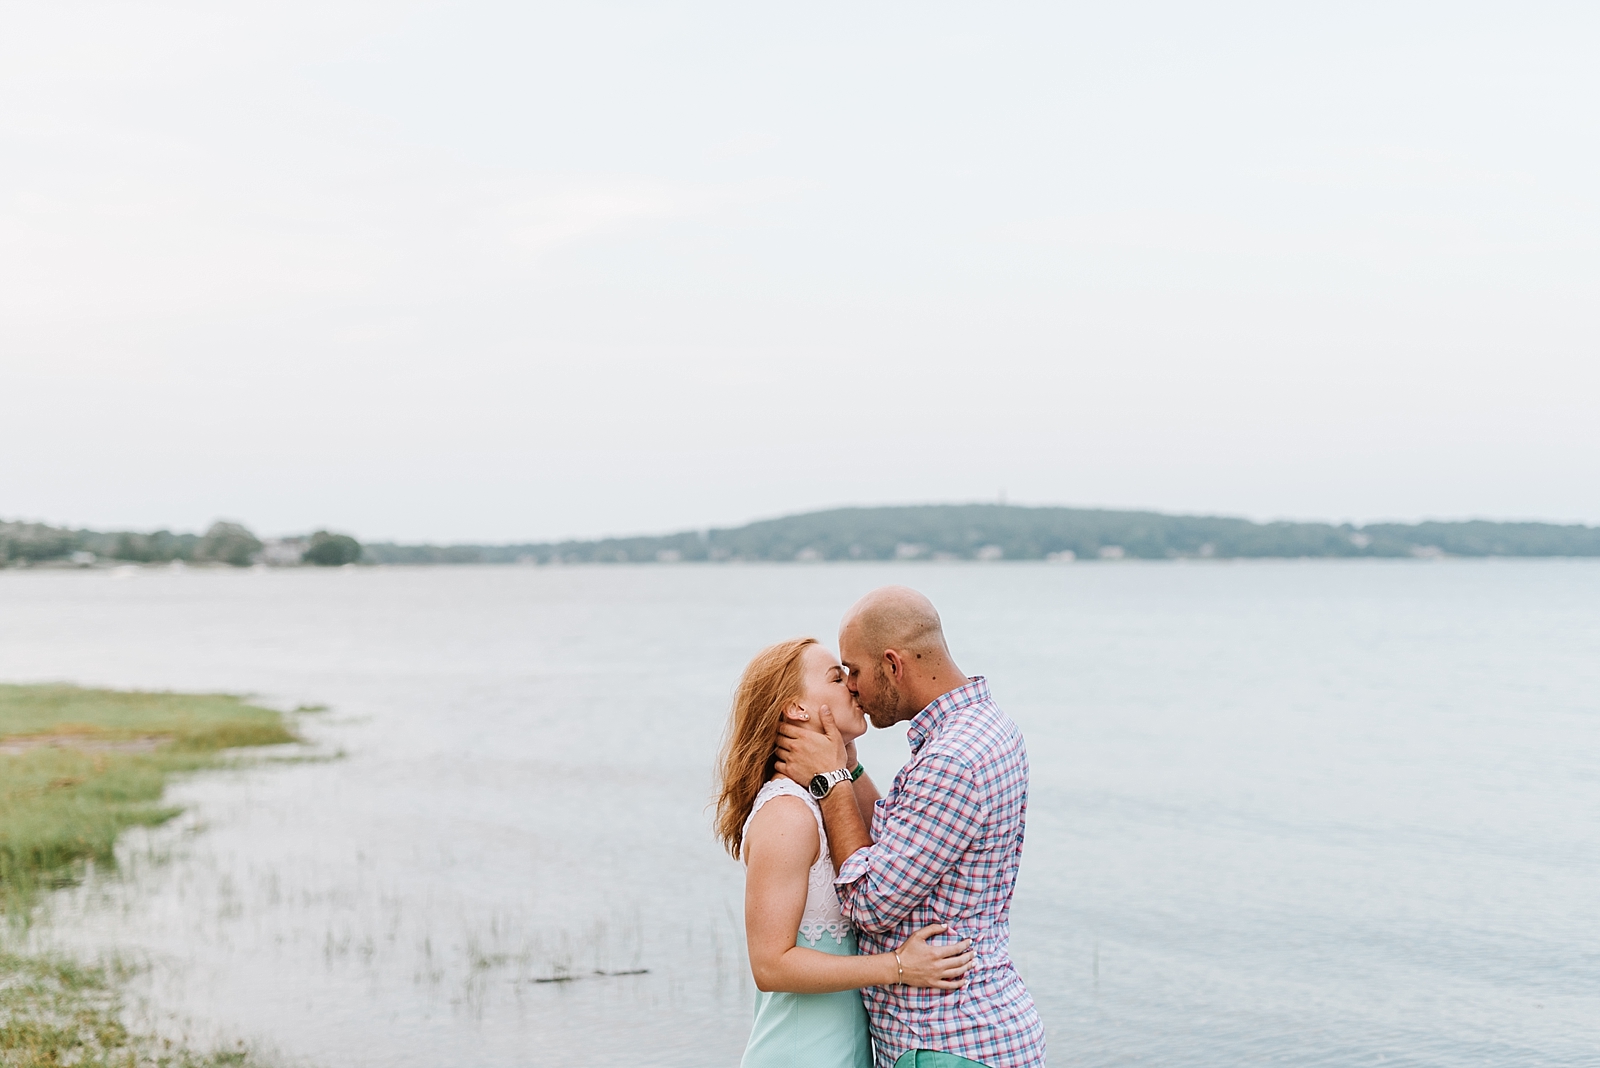 Romantic Summer Engagement Session at Bay Farm in Duxbury by Boston Wedding Photographer Annmarie Swift